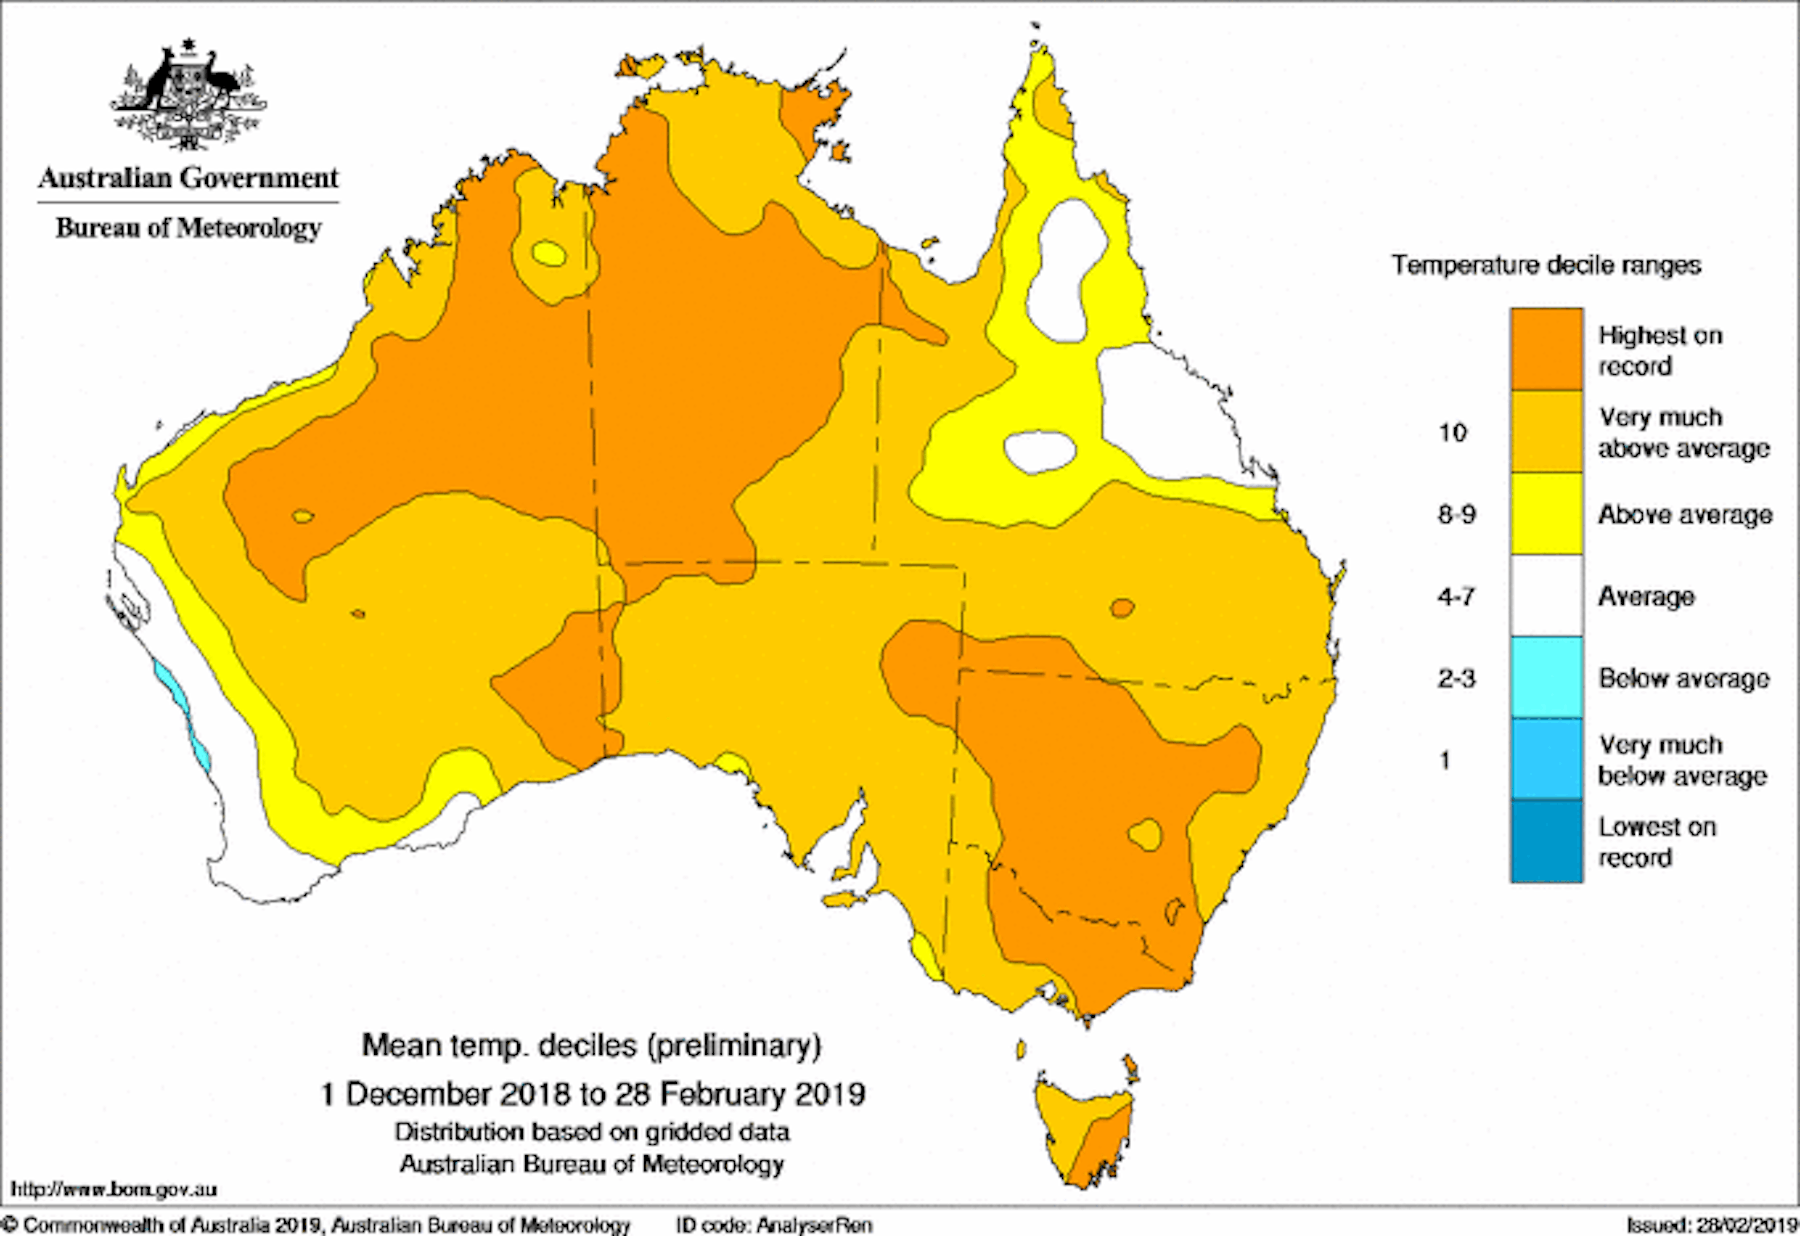 201819 was Australia's hottest summer on record, with a warm autumn